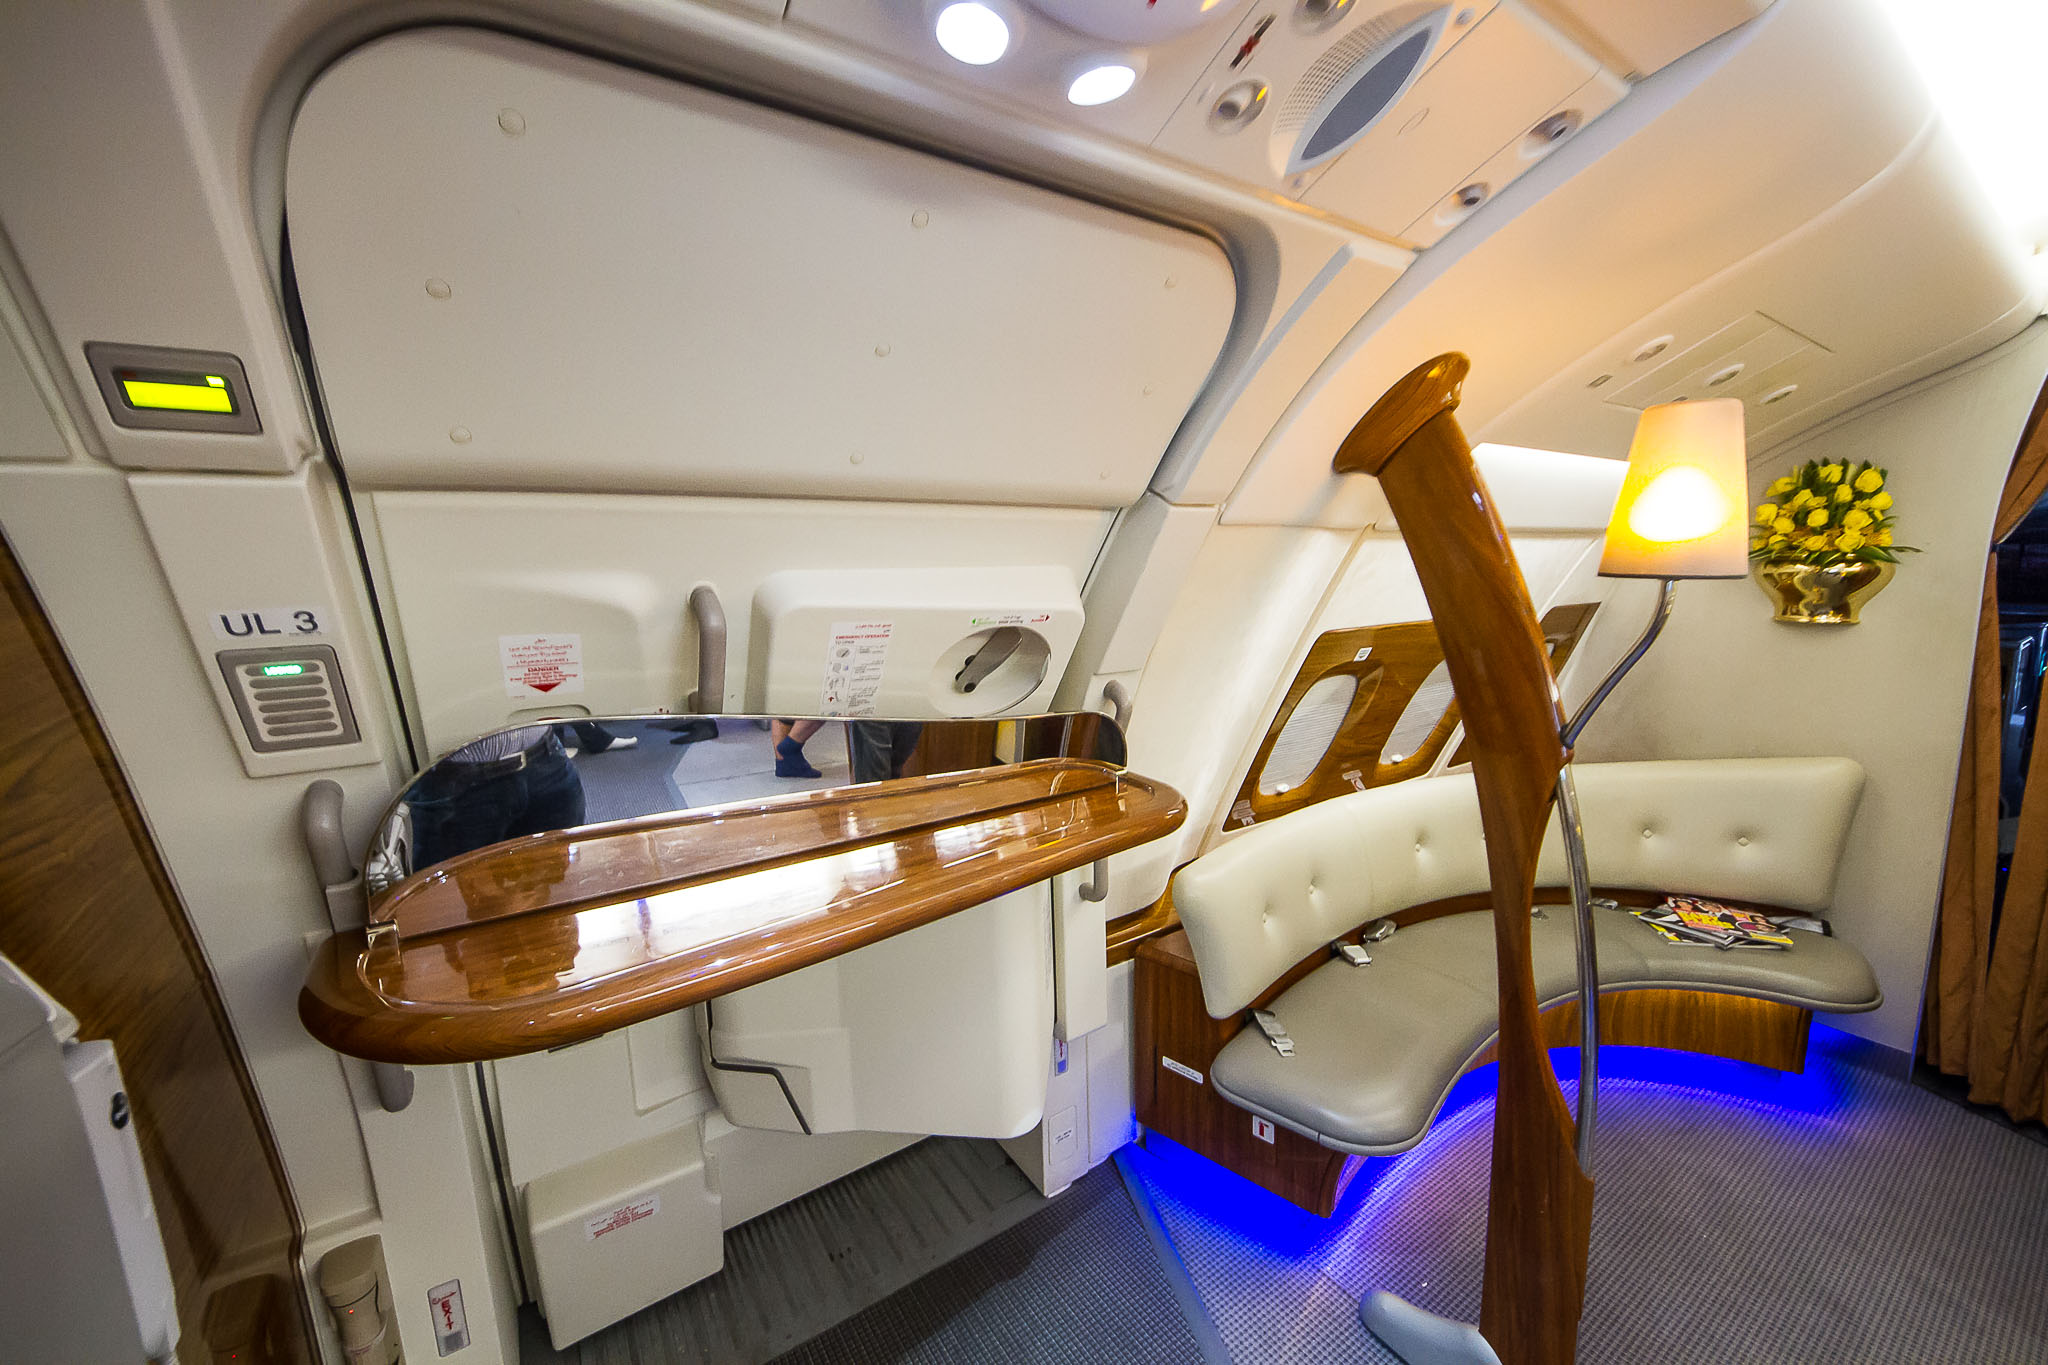 Champagne, Caviar, and a Shower at 40,000FT – Emirates ...